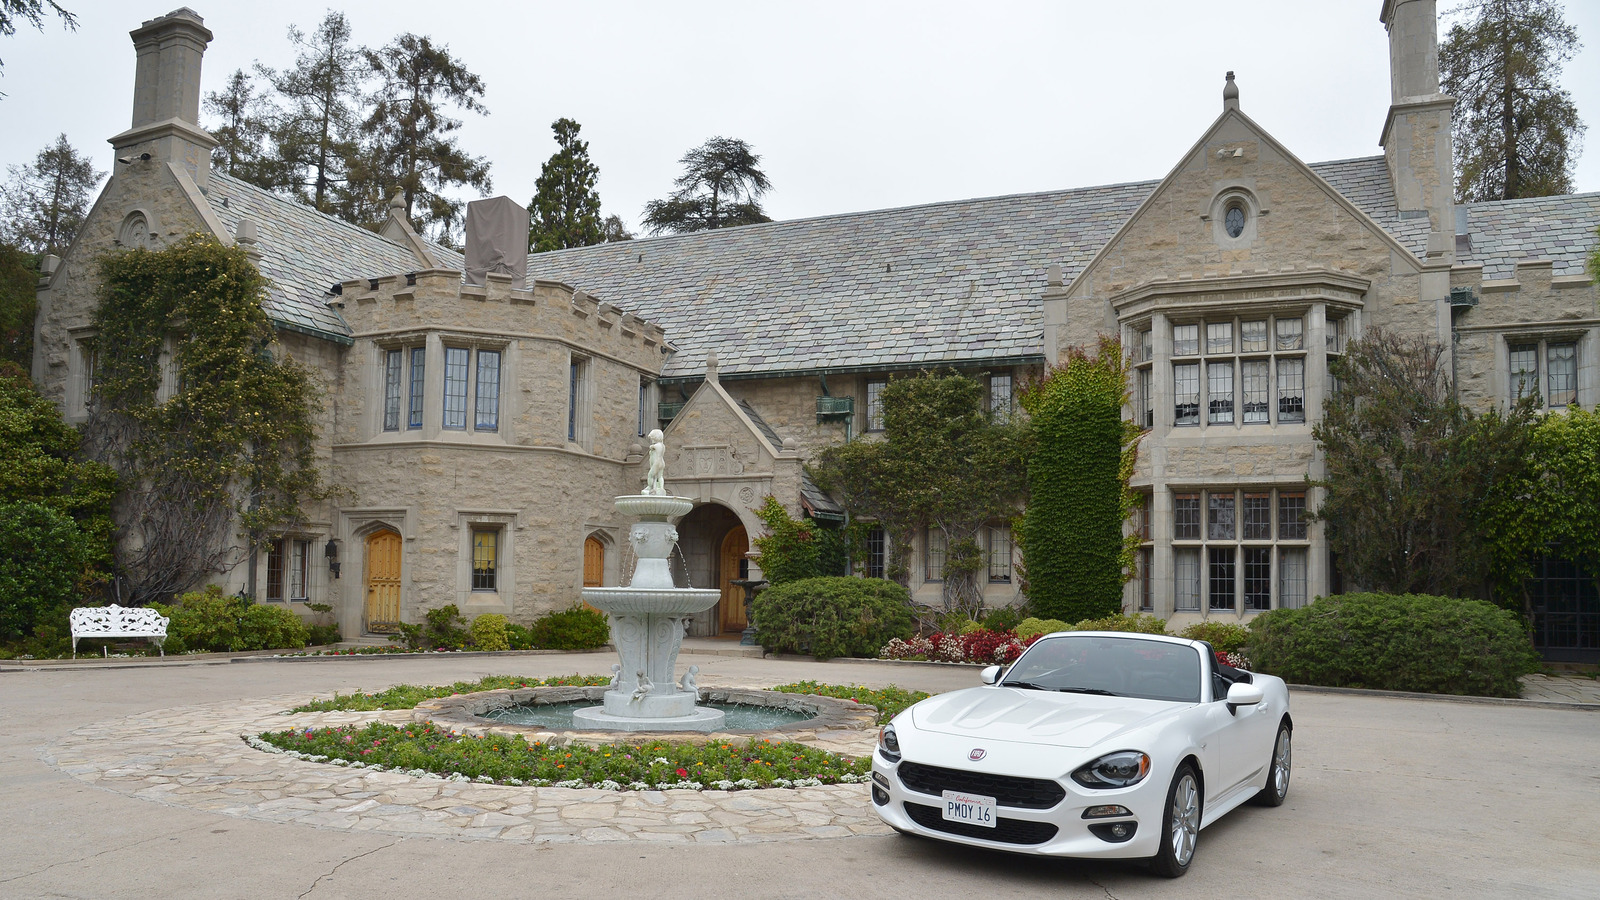 Facts About The Playboy Mansion The Public Doesn't Know